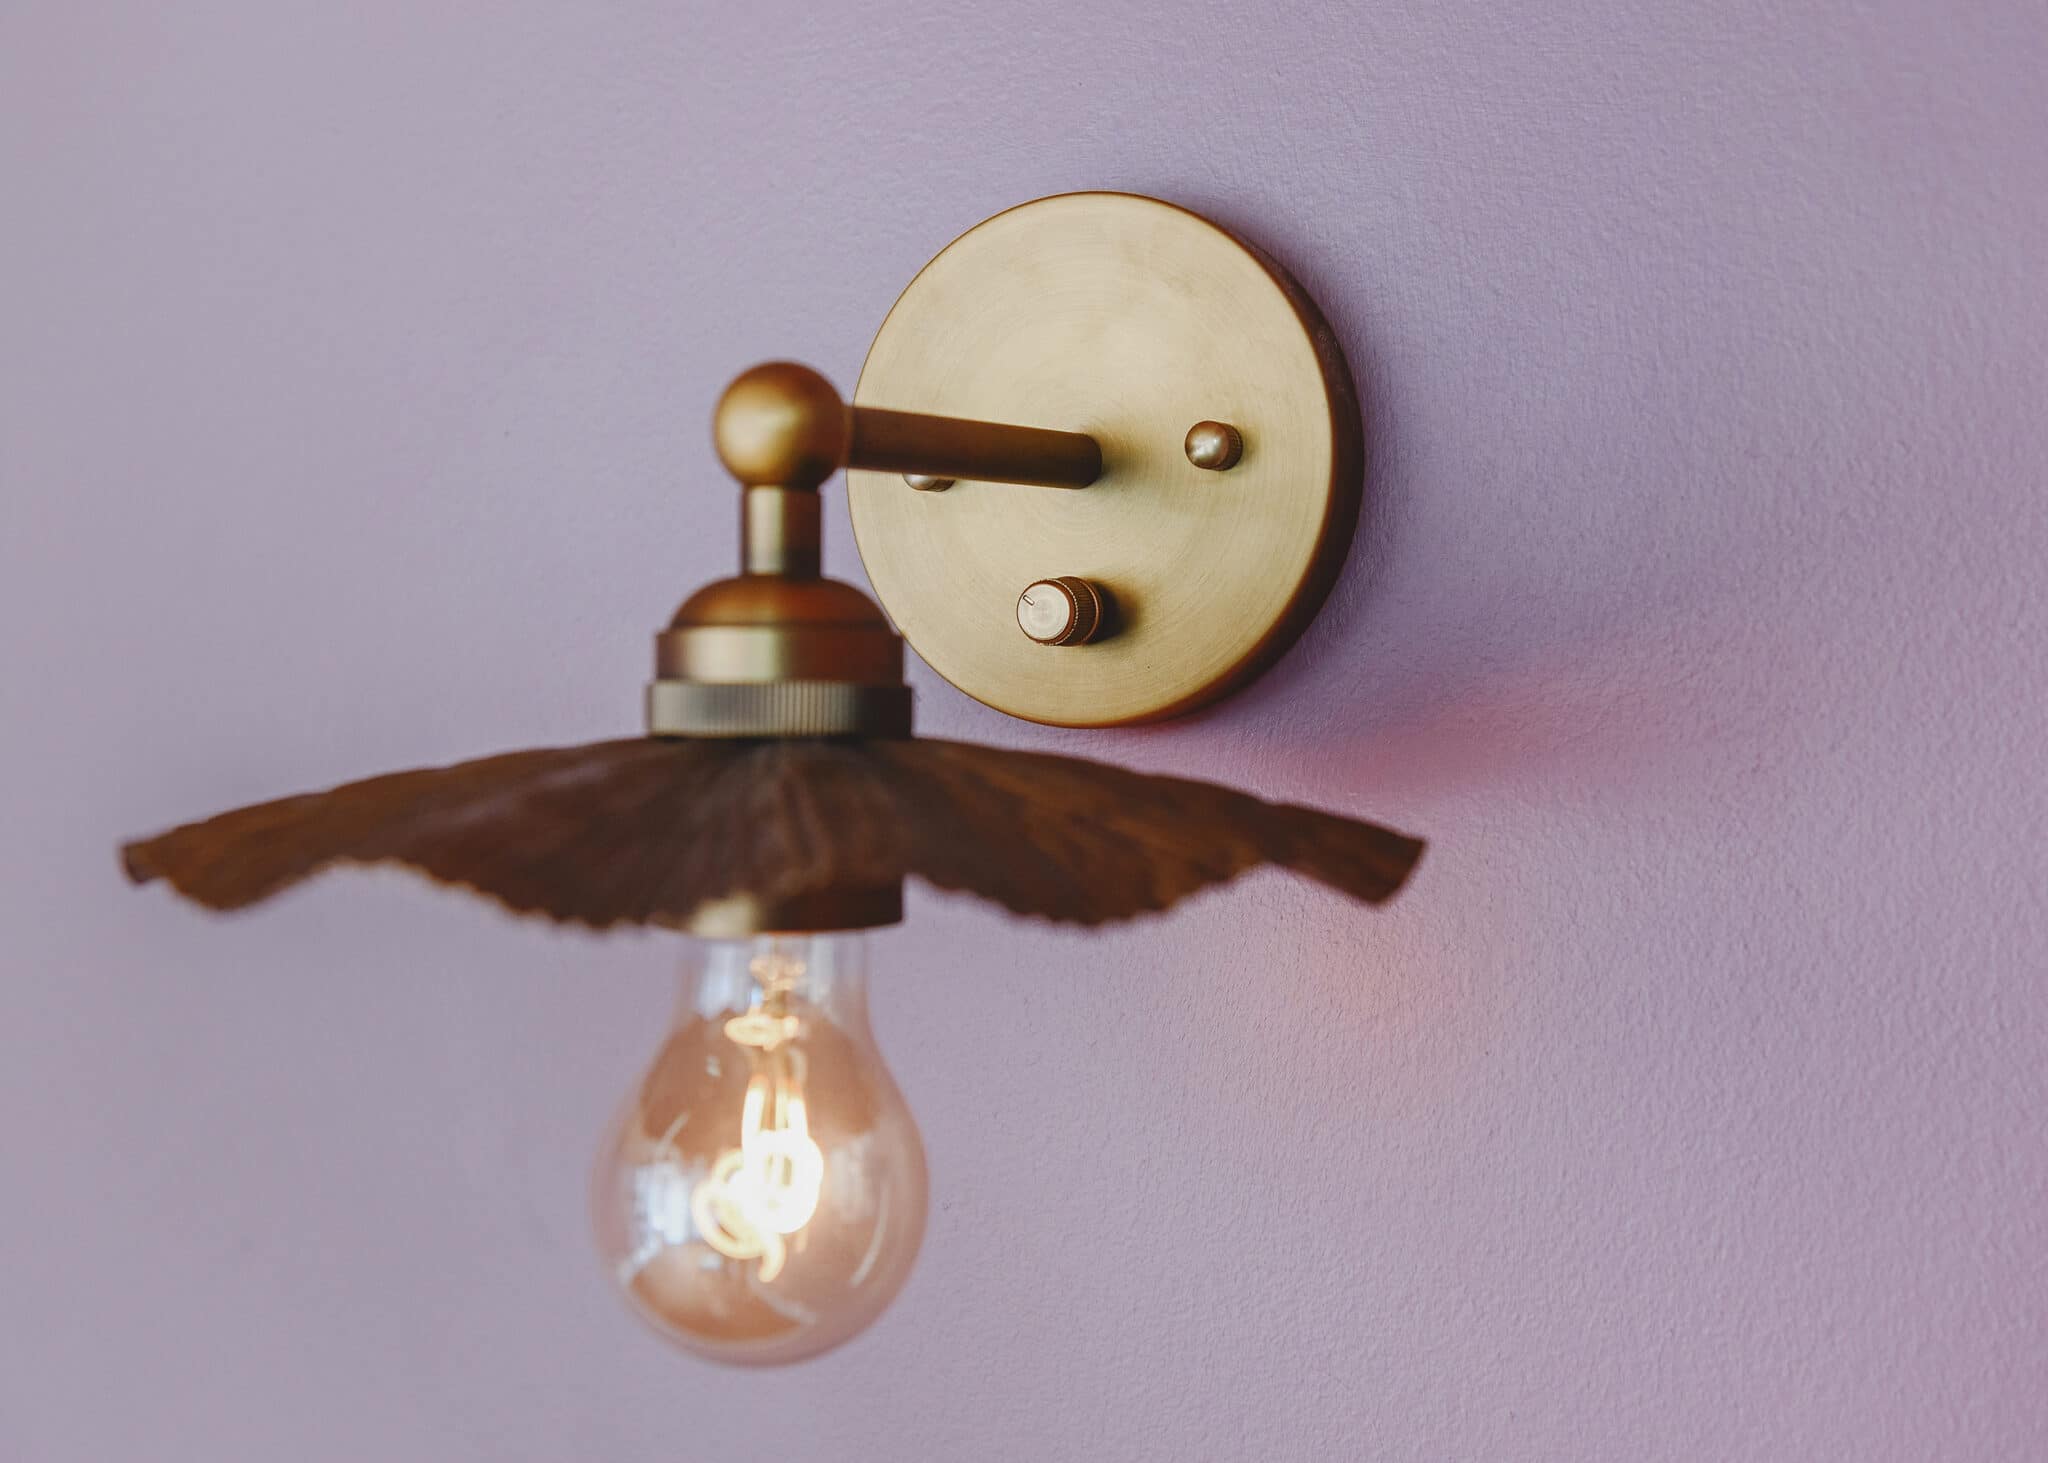 Brass sconce close-up with a newly installed rotary dimmer | via Yellow Brick Home